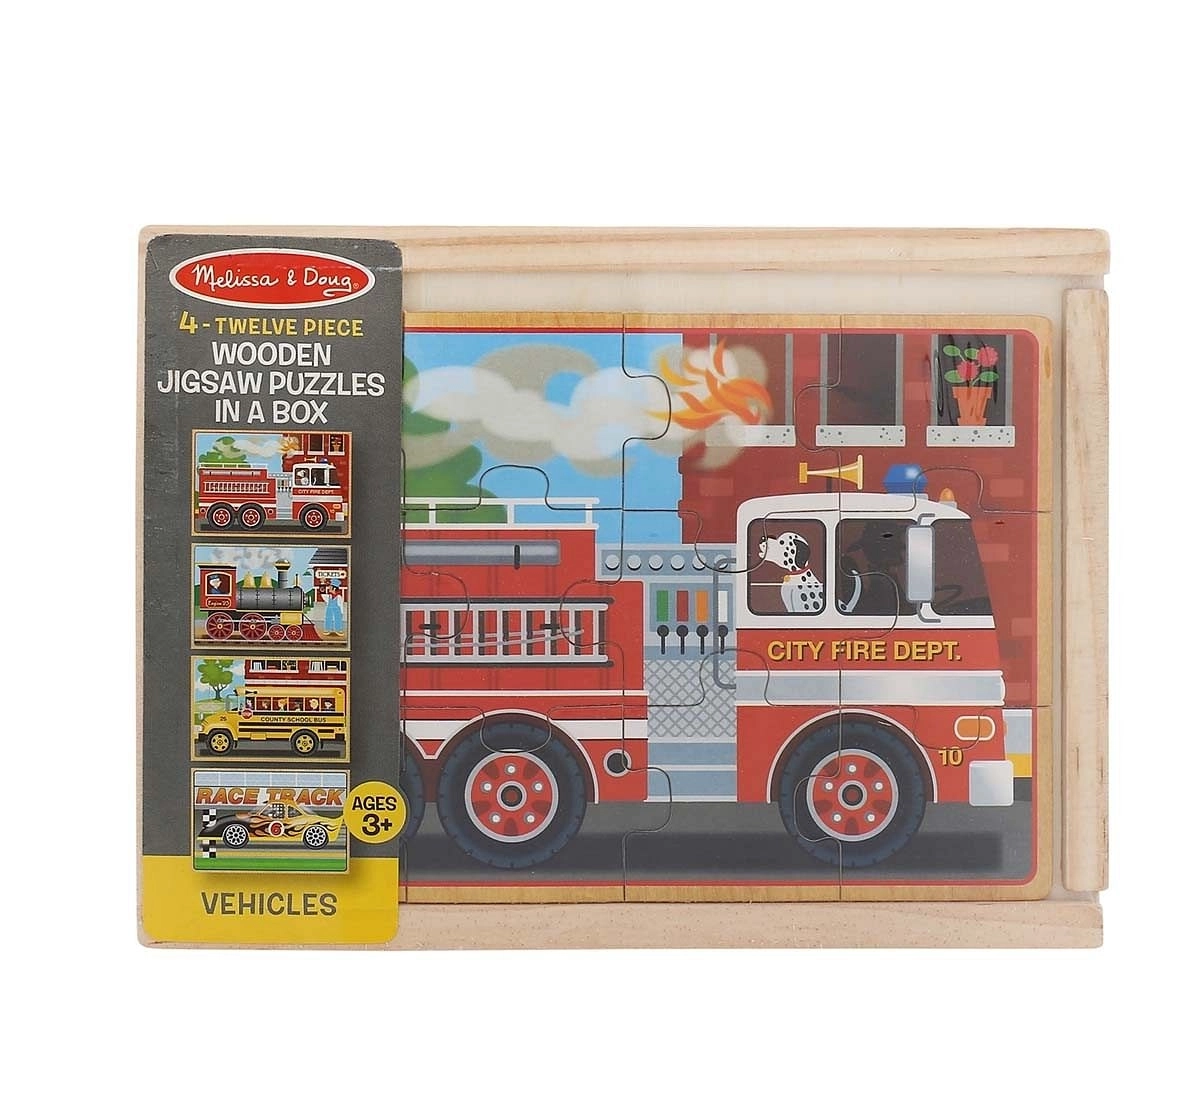 Melissa & Doug Vehicles Jigsaw Puzzles In A Box (Four Wooden Puzzles, Sturdy Wooden Storage Box, 12-Piece Puzzles) Wooden Toys for Kids age 3Y+ 